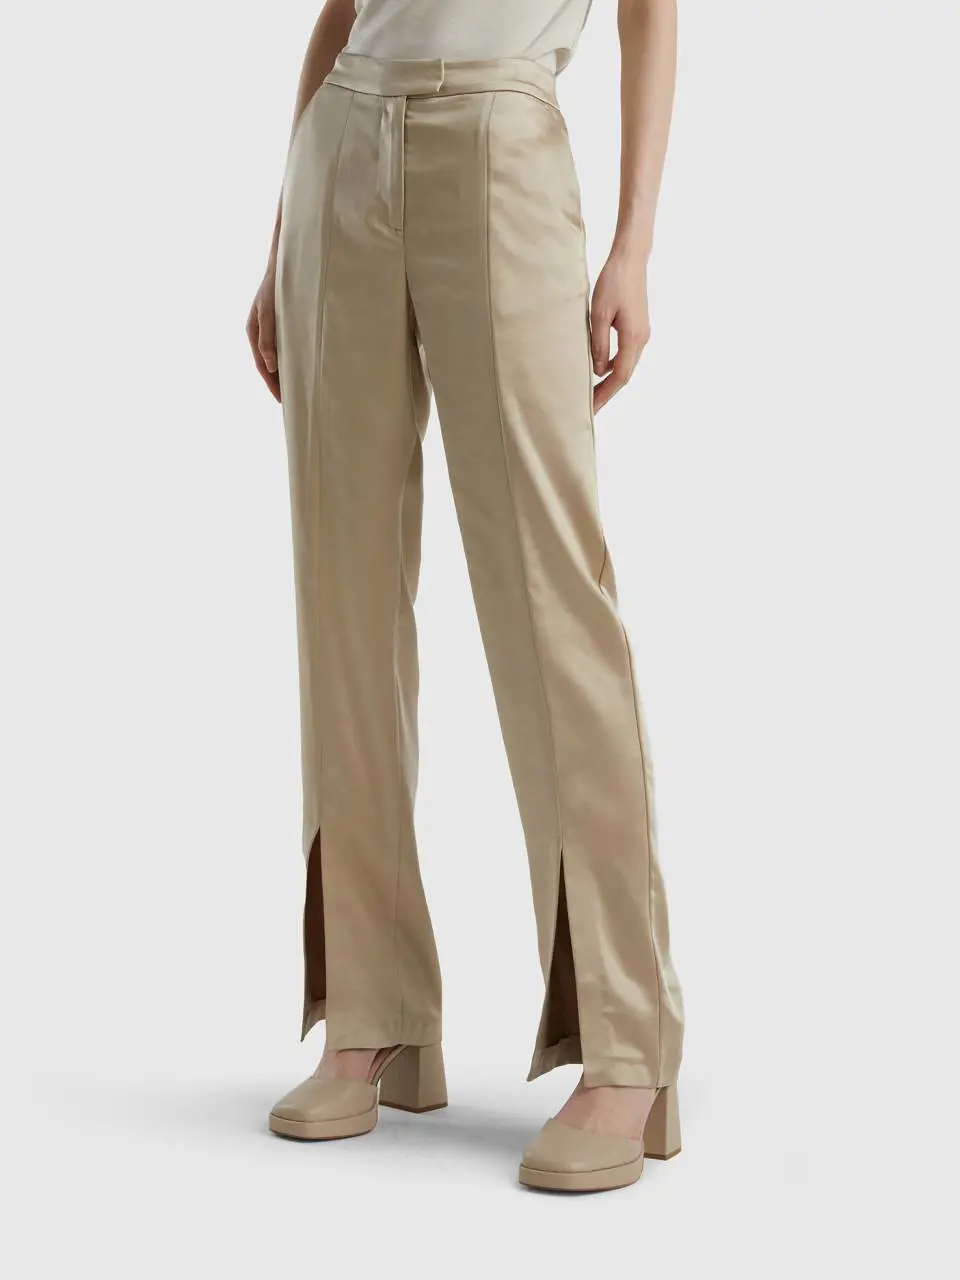 Benetton satin look trousers with slit. 1